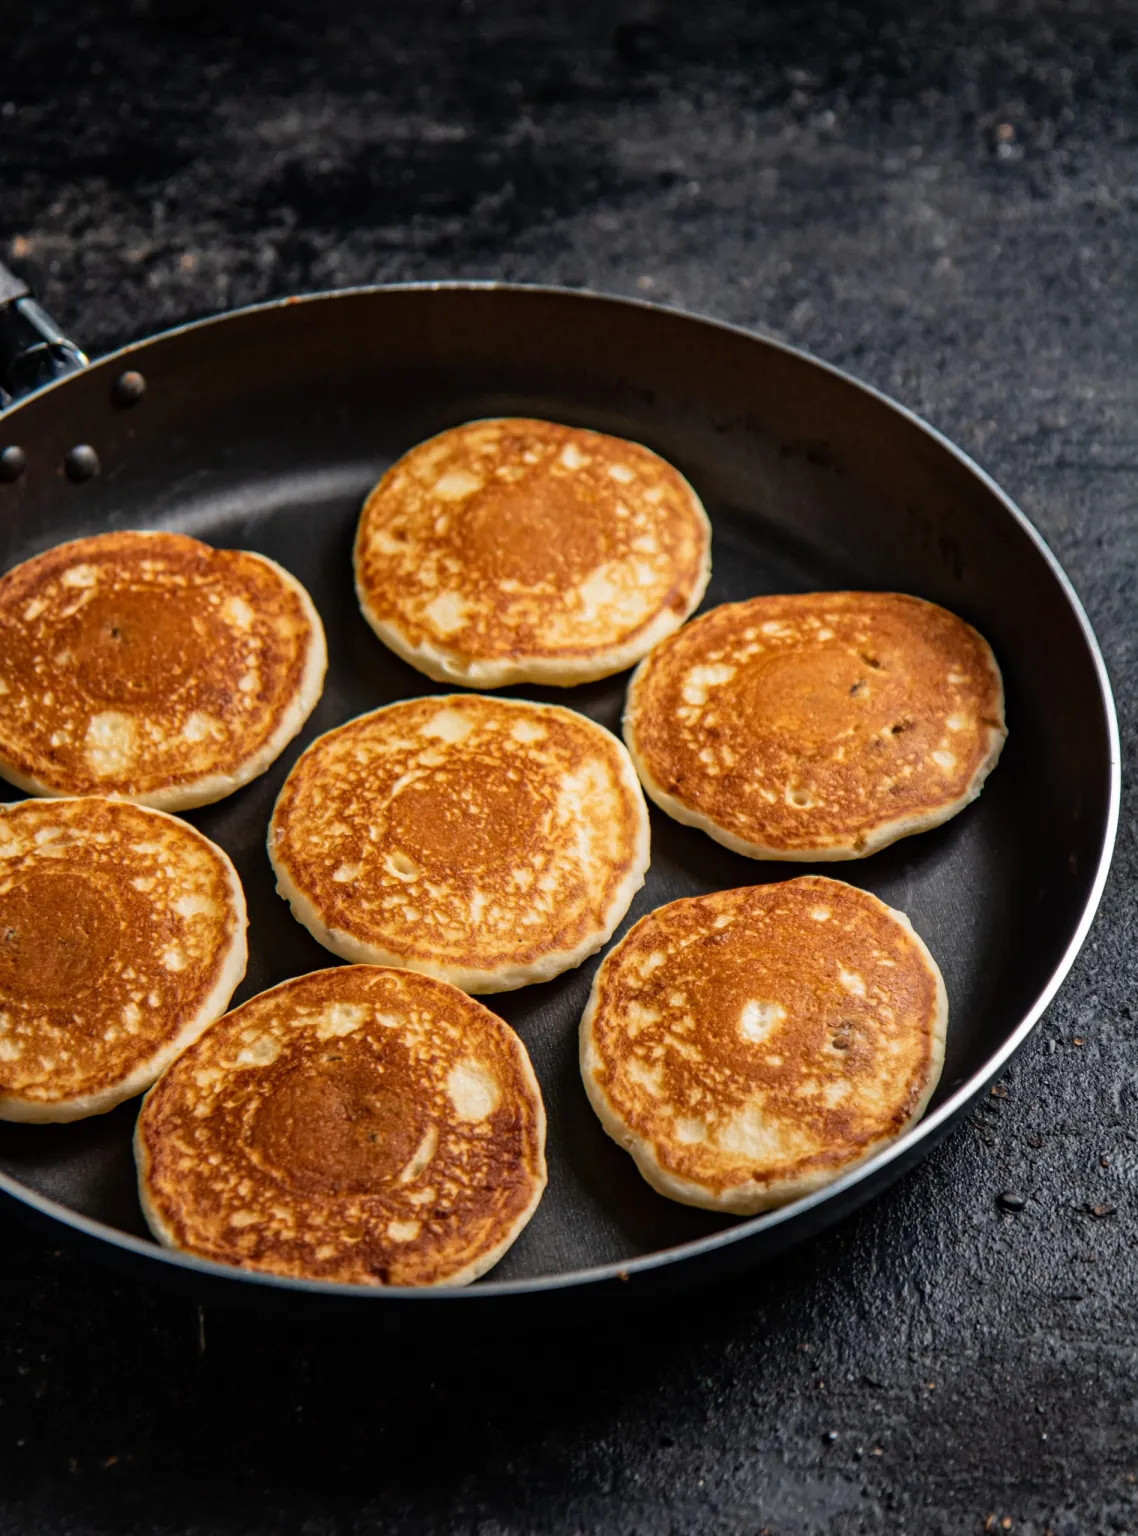 High protein pancakes in a frying pan on a dark background.